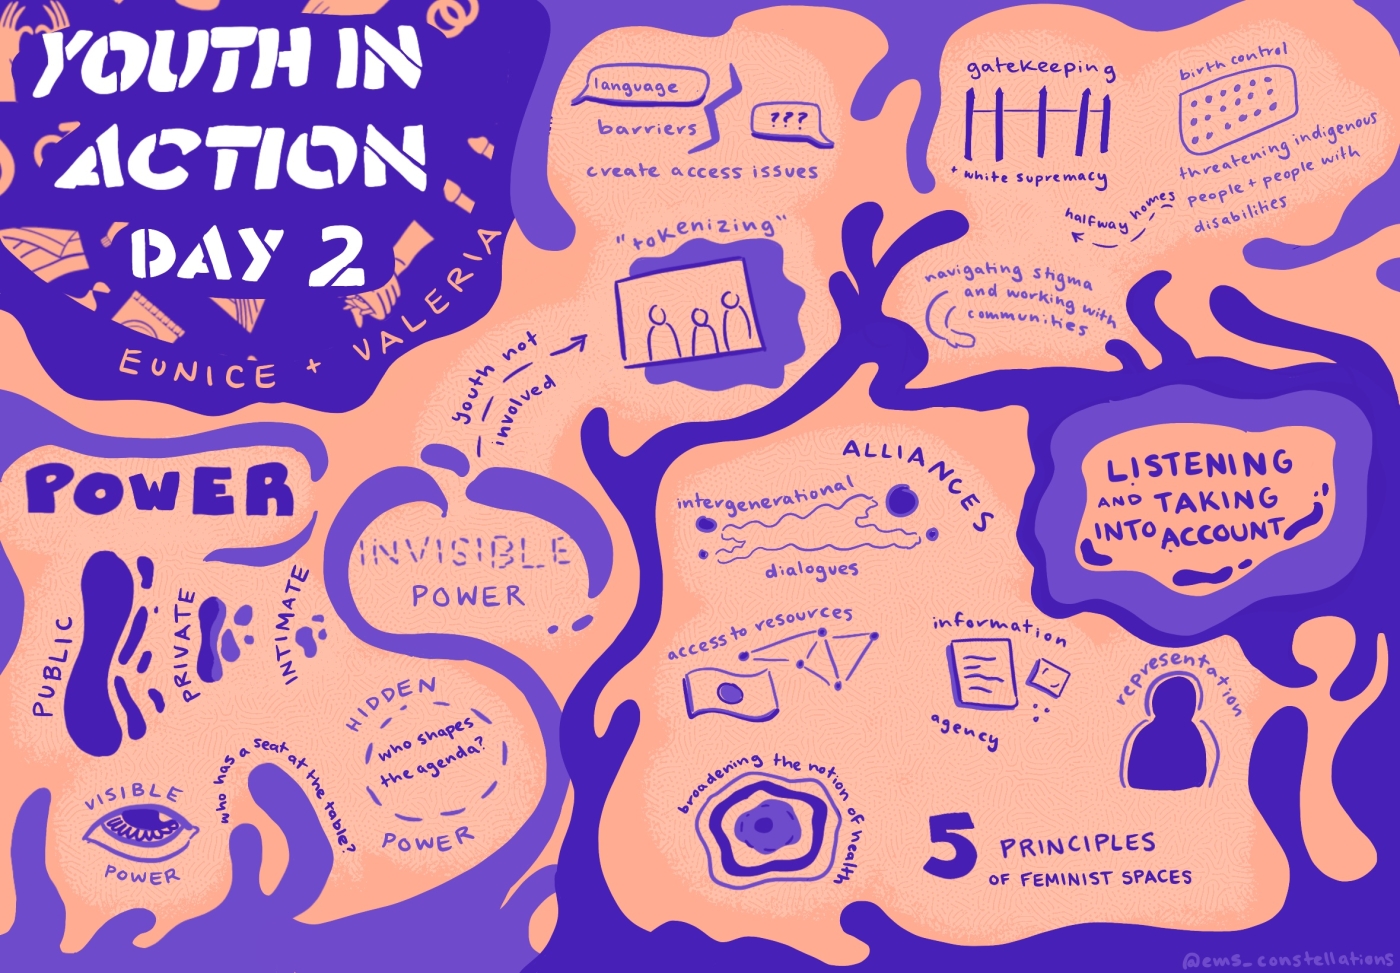 Visual brainstorm of Day 2 of the Youth in Action Forum in orange and purple text and doodles. The brainstorm outlines concepts of relationship-building in SRHR movements.